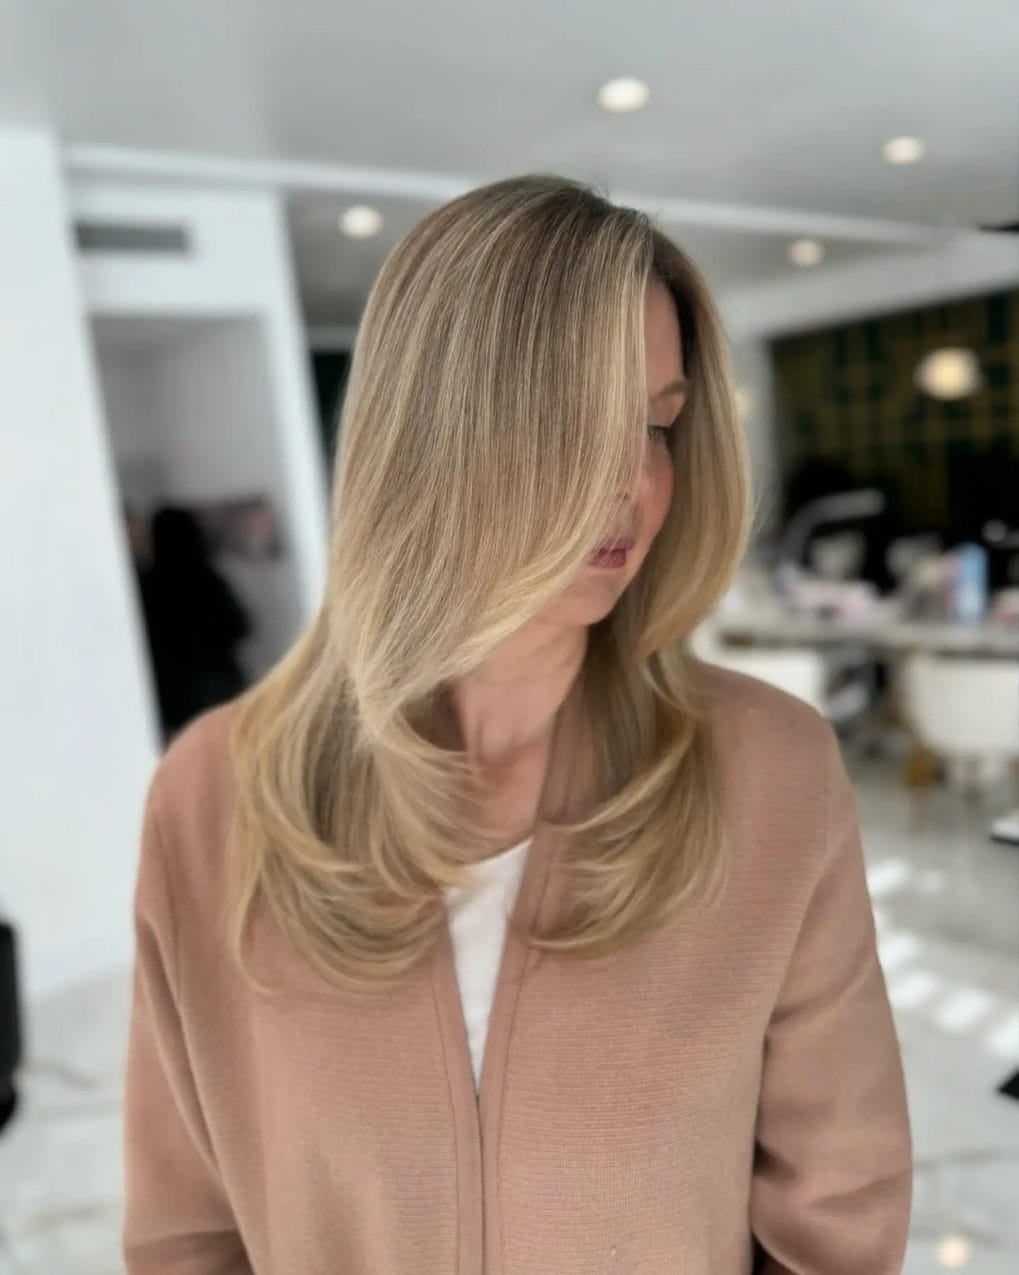 Long sandy blonde hair with subtle curls at the ends and layered styling